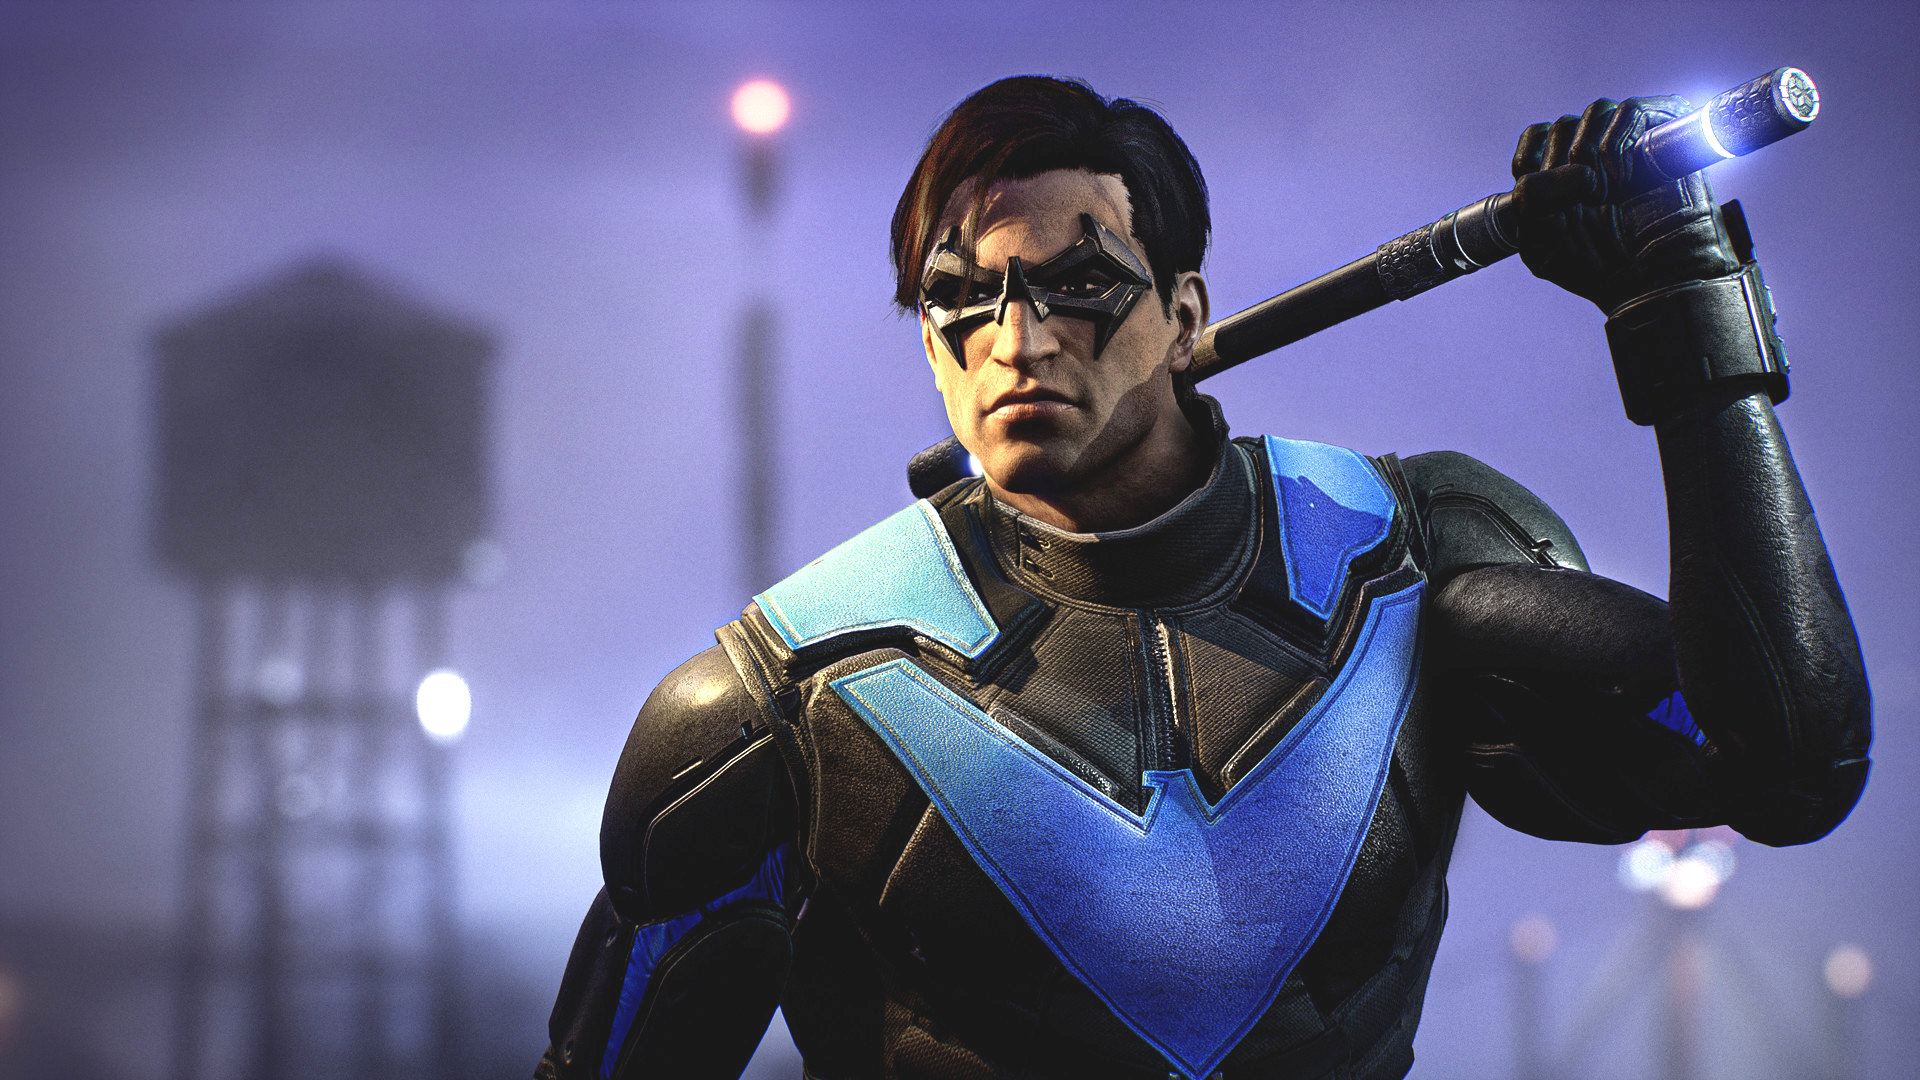 Gotham Knights: Players will need multiple playthroughs to discover everything